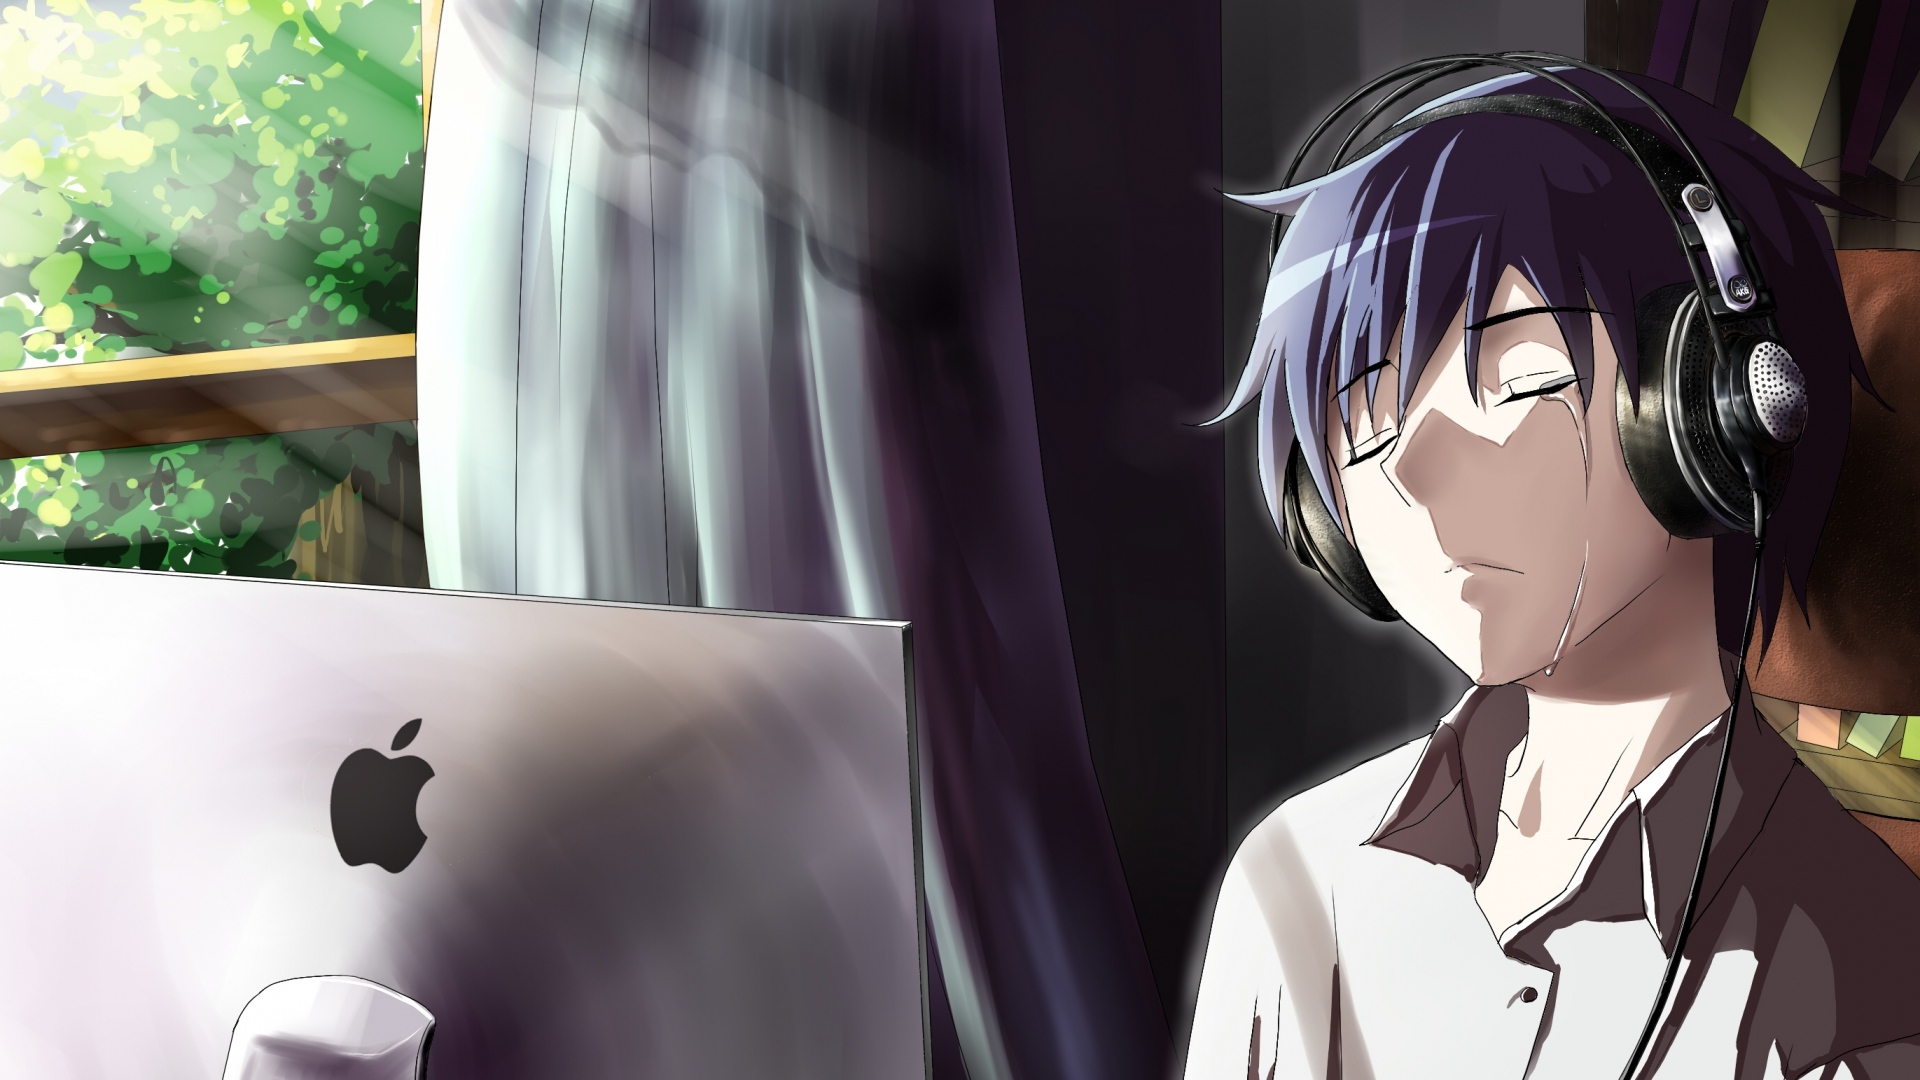 1920x1080 Anime Boy Crying In Front Of Apple Laptop Laptop ...